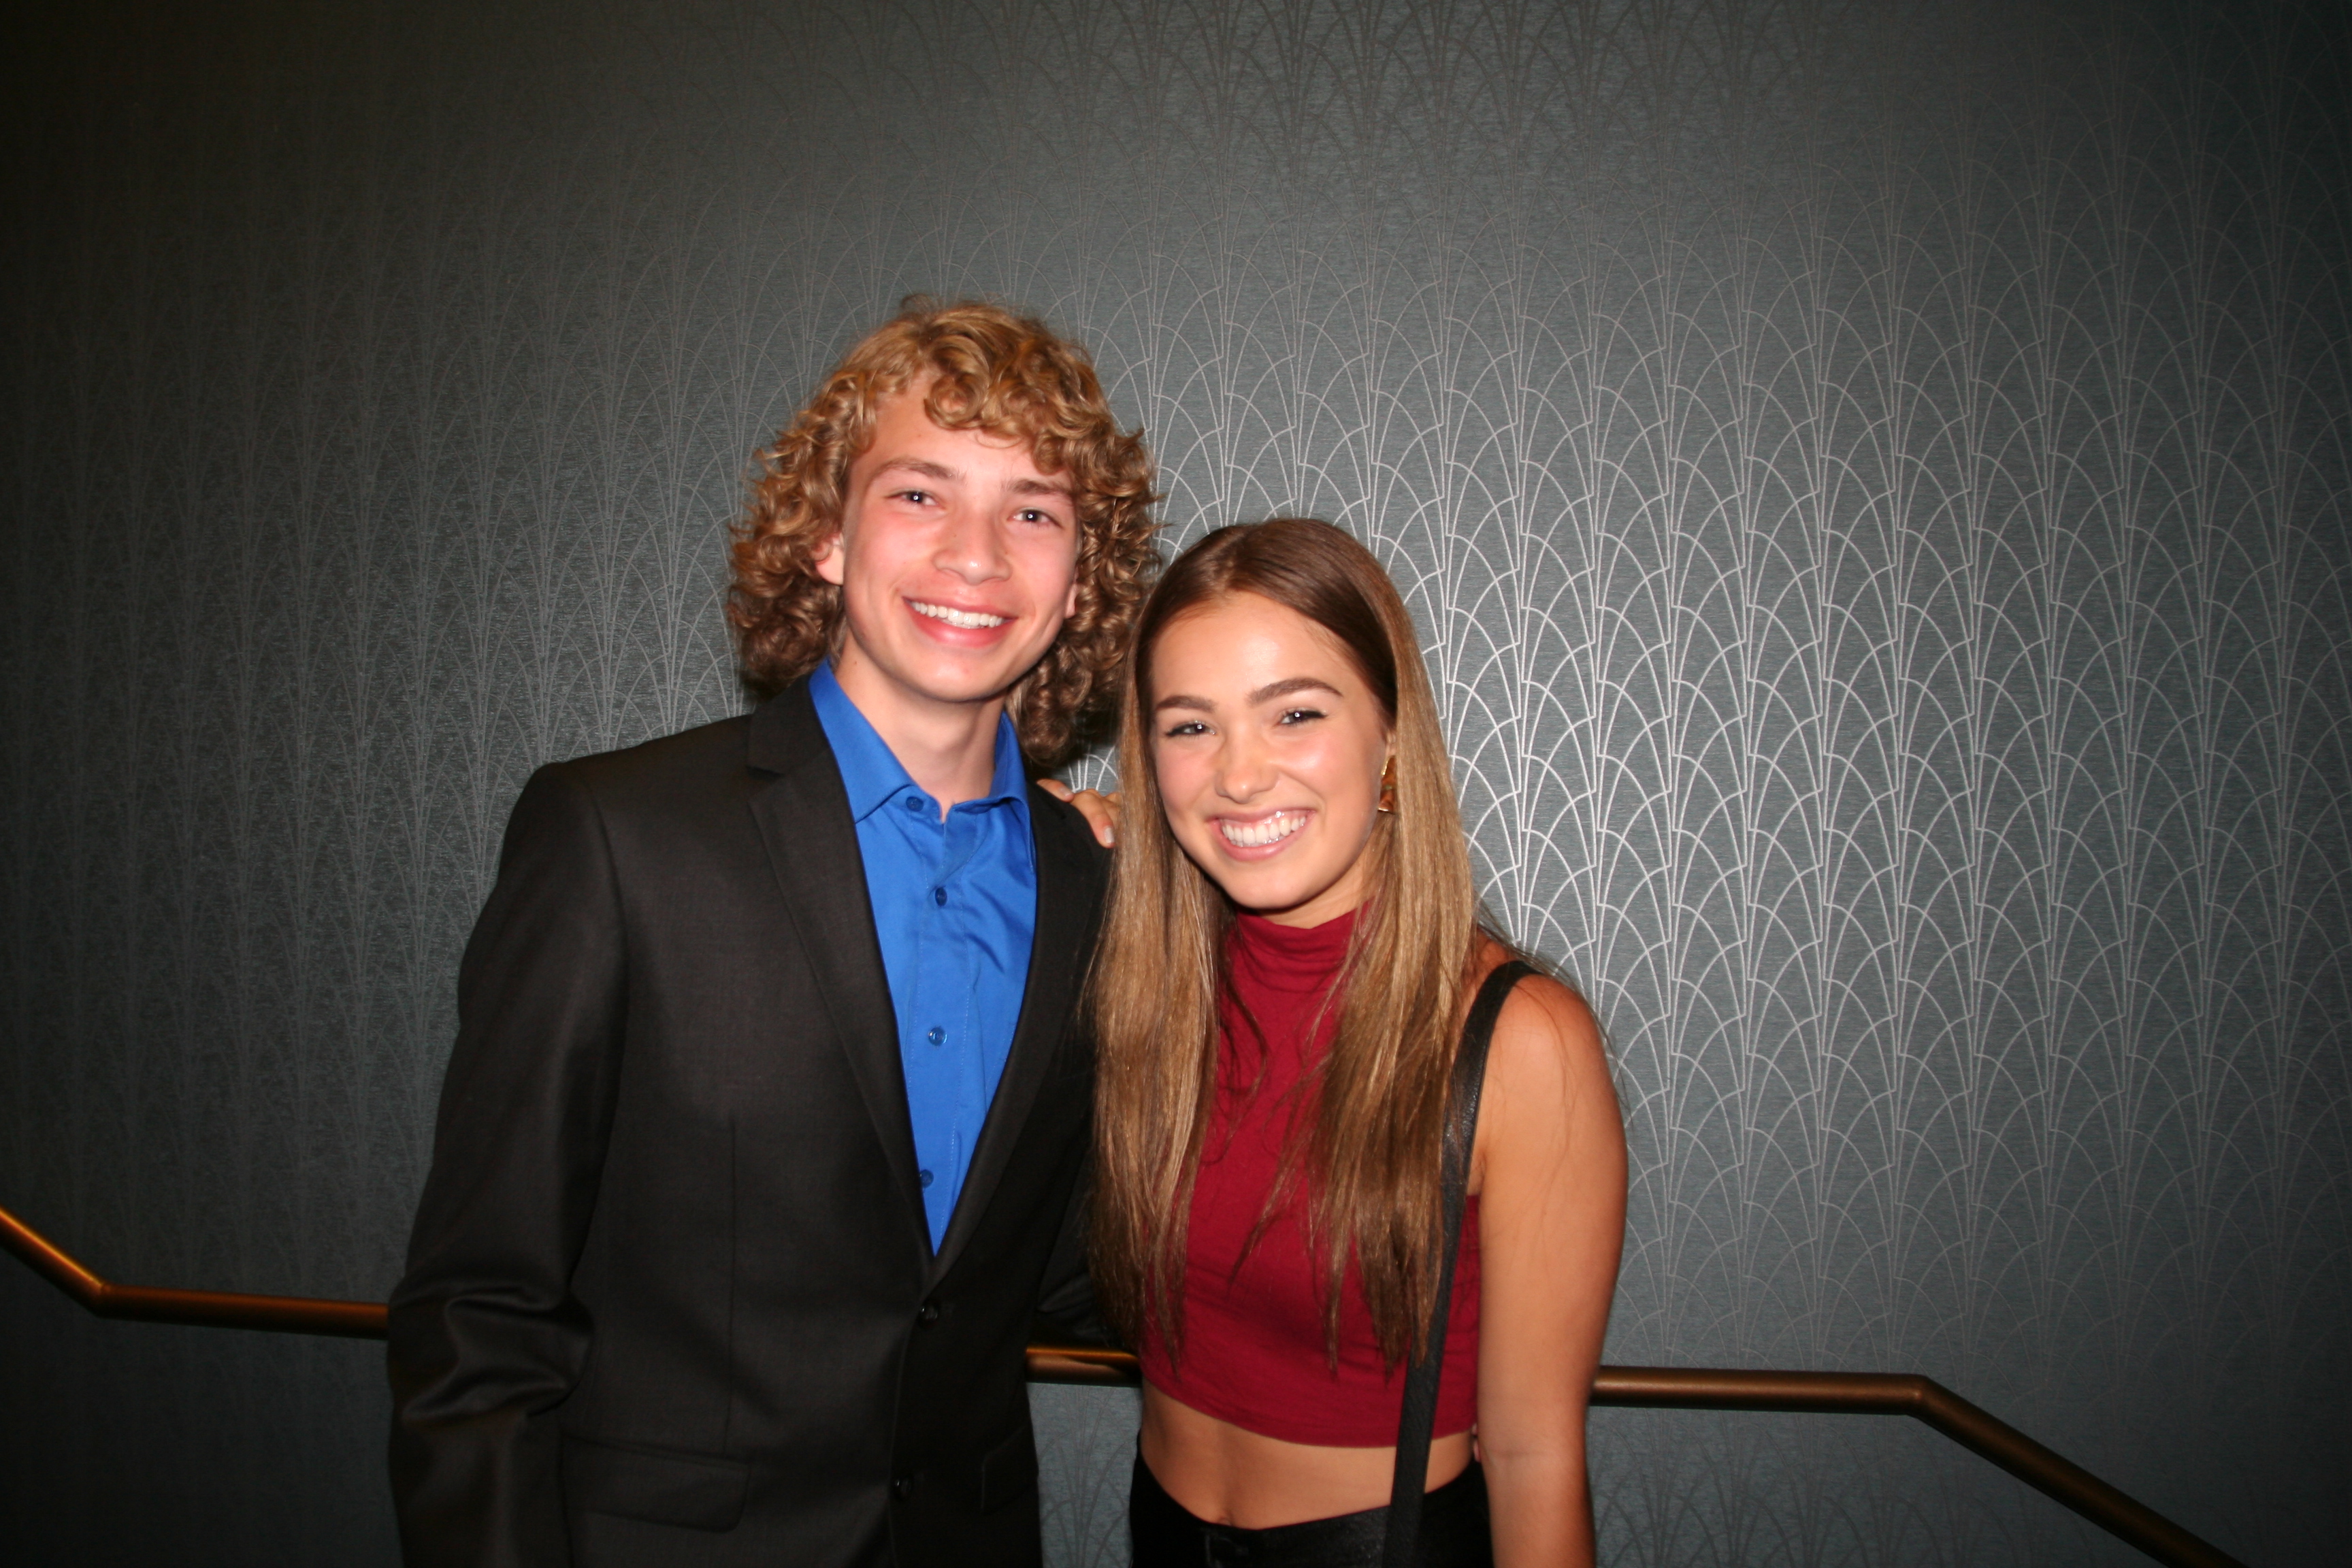 Will Meyers and Haley Lu Richardson at the LAFF Premiere of The Young Kieslowski (June 17, 2014)